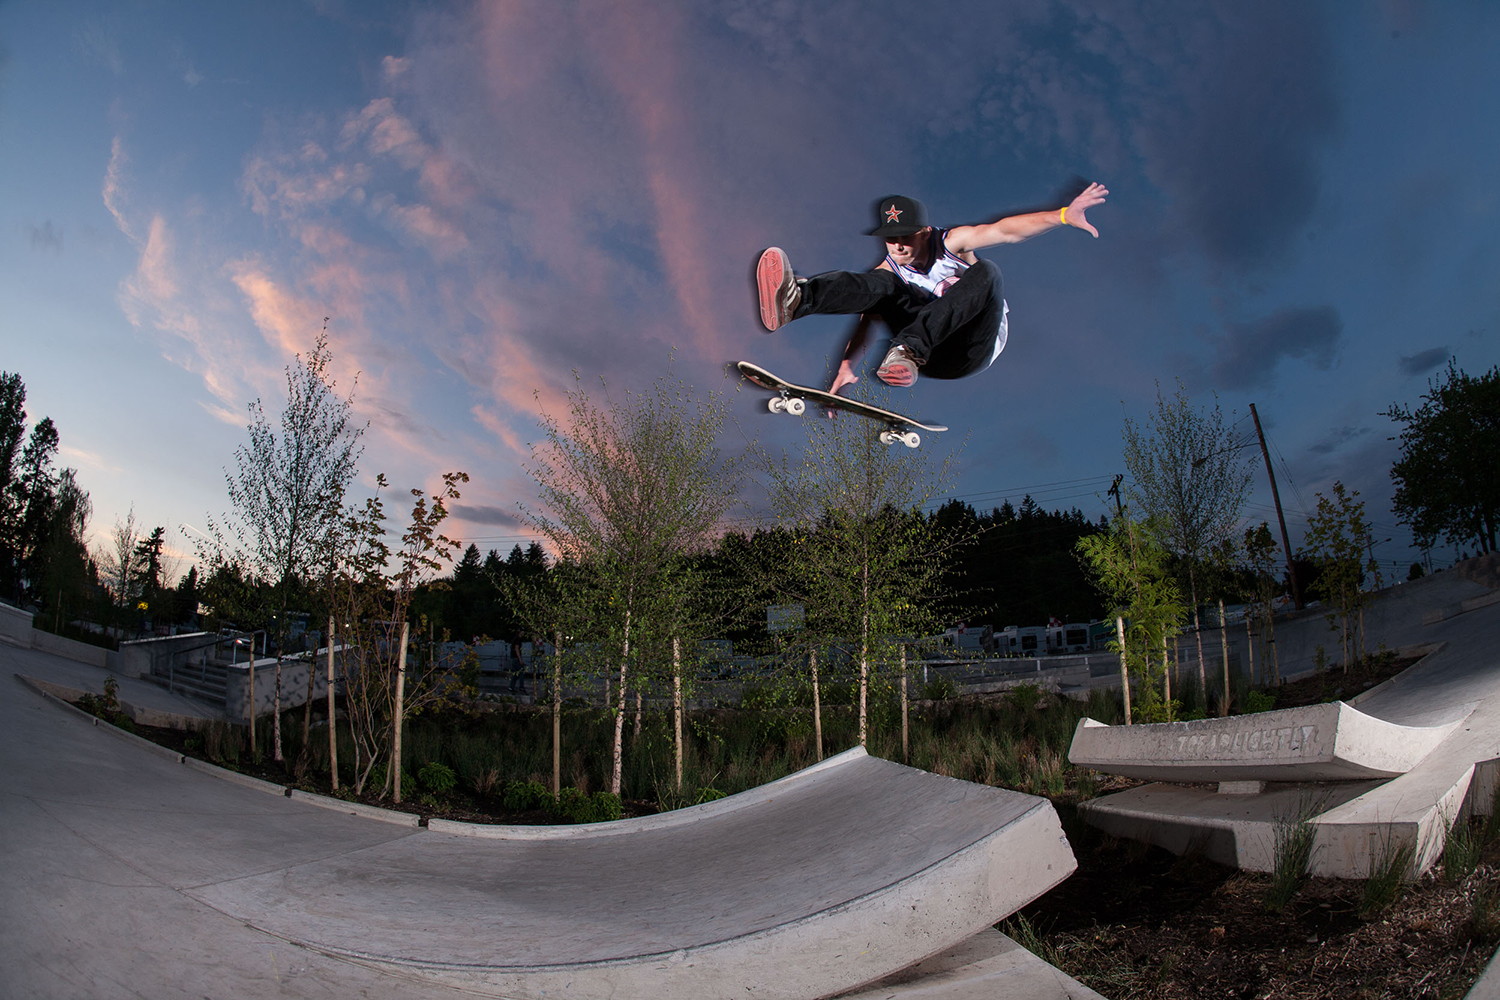  Ed Benedict Street Plaza’s gap jump is a popular feature amongst locals and visitors. 